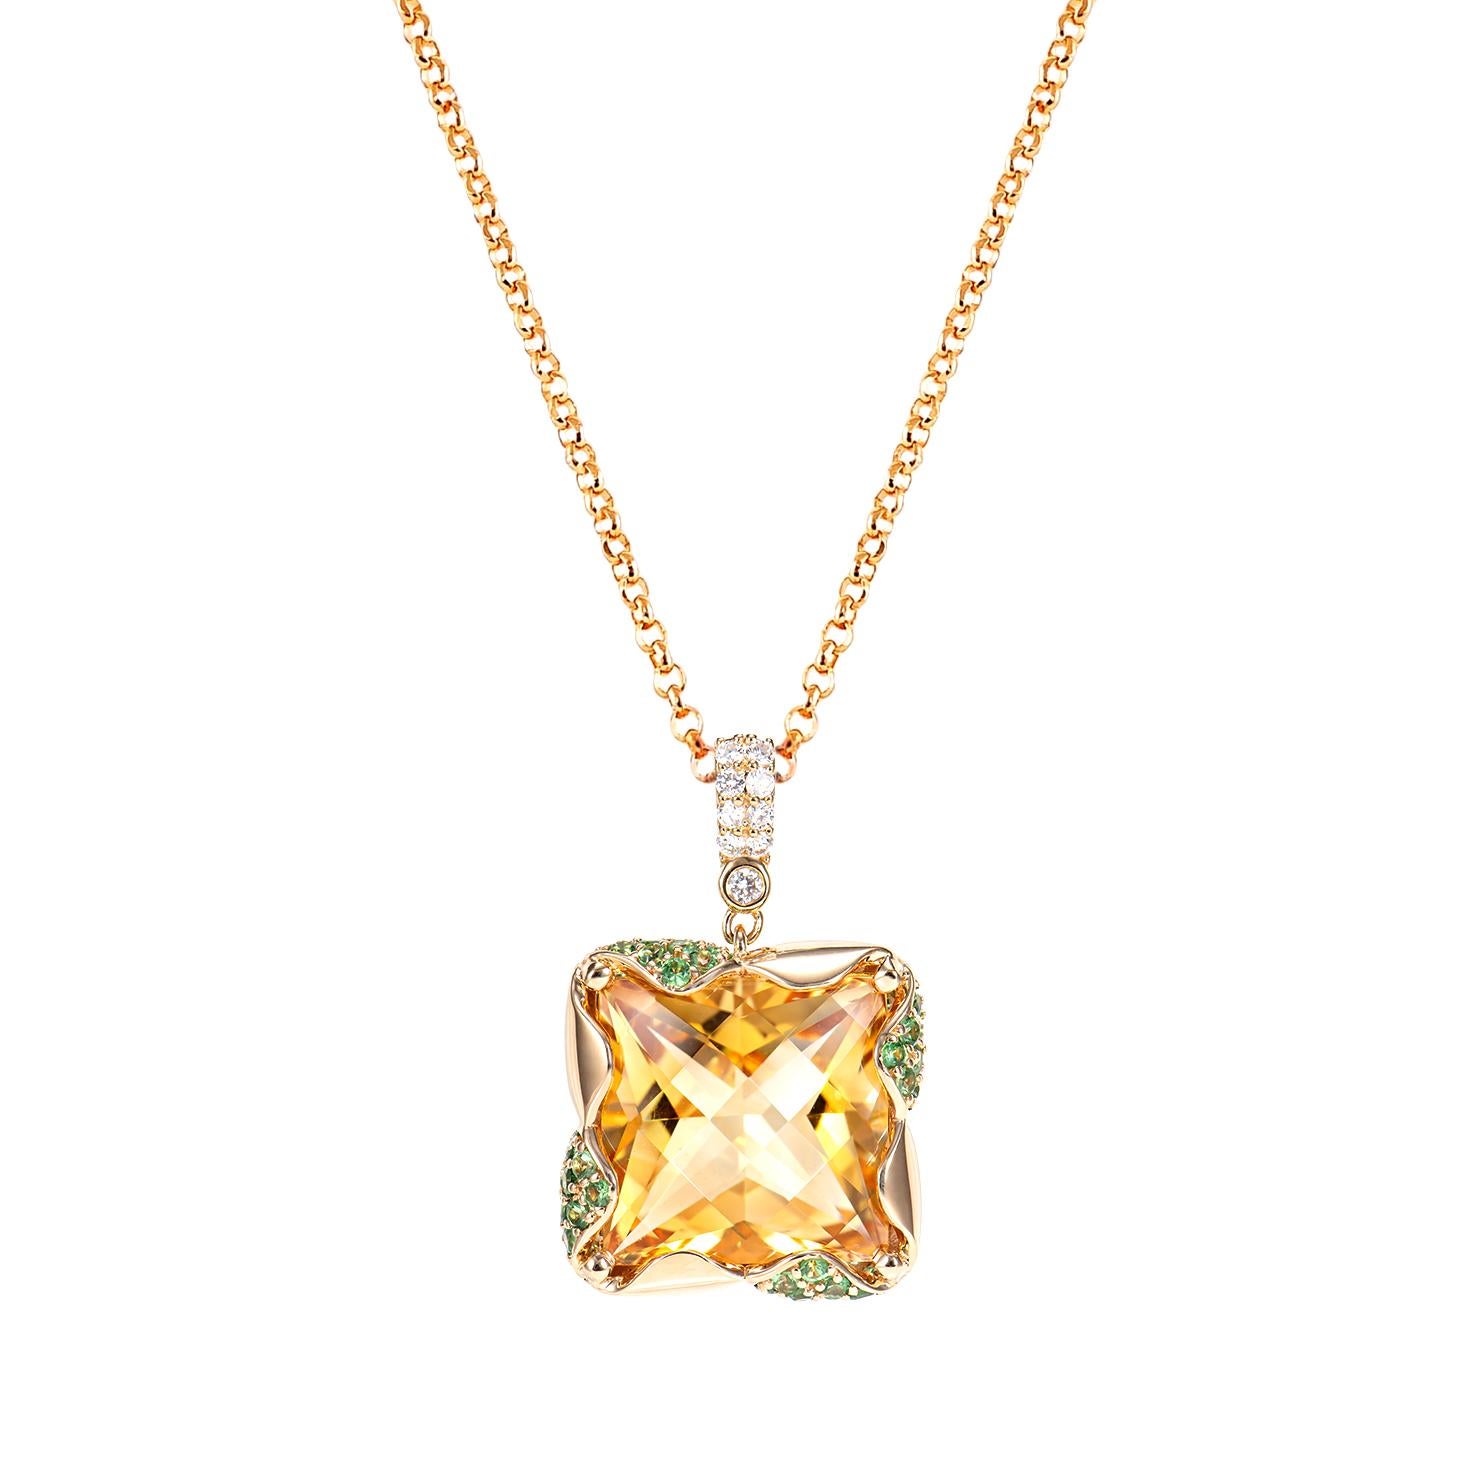 Square Cut 11.35 Carat Citrine Pendant in 18KYG with Tsavorite and White Diamond. For Sale